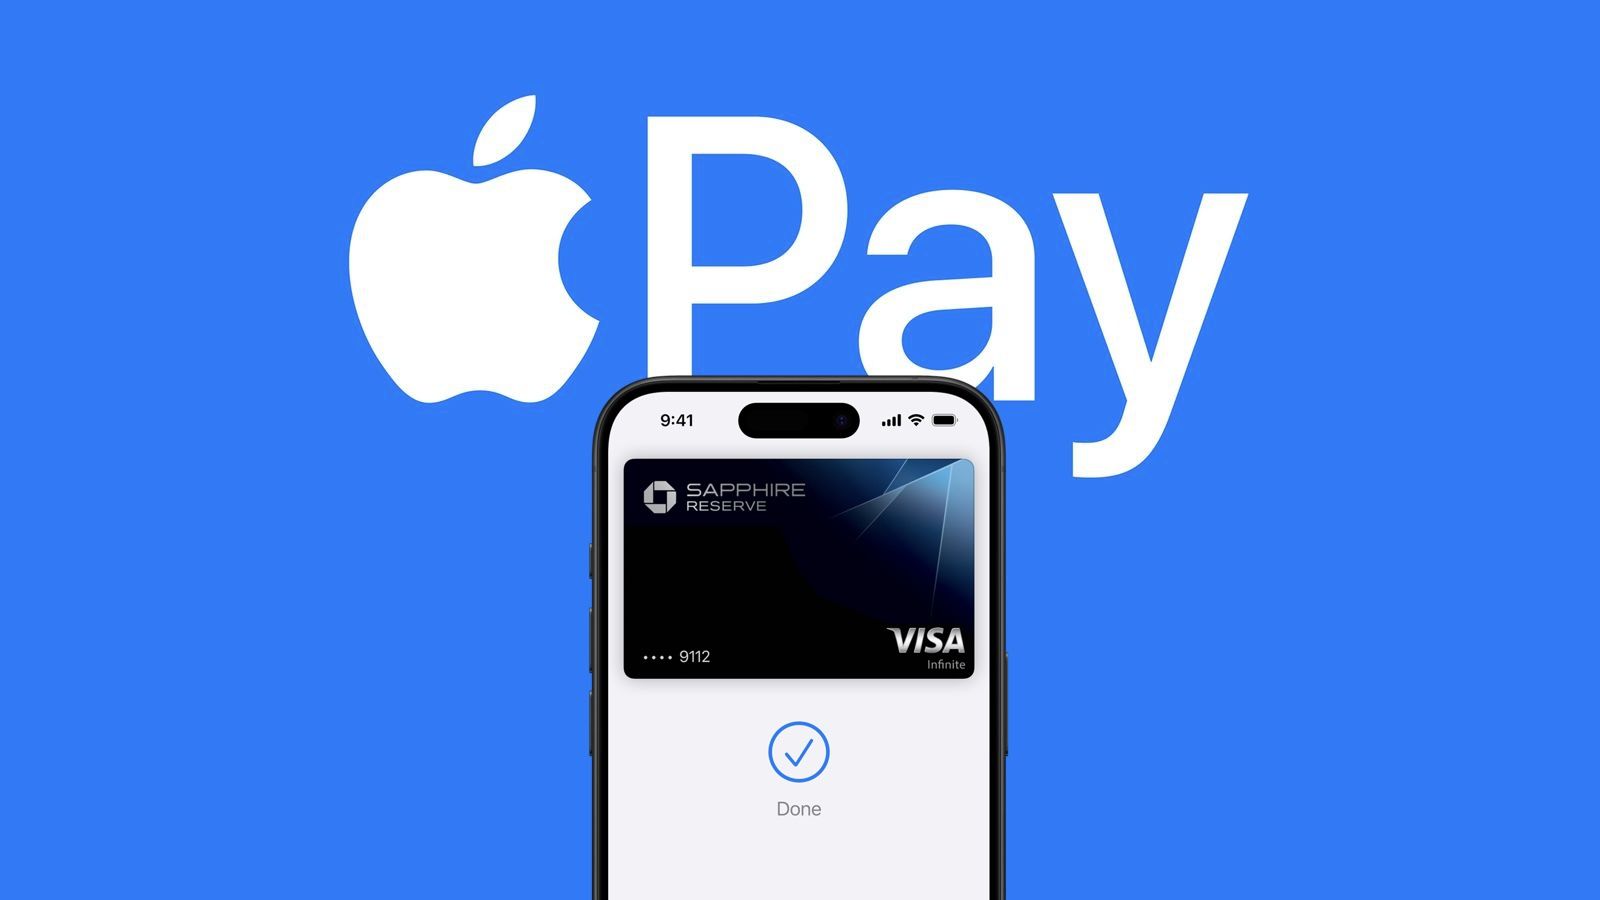 Apple Opens Up NFC to Third-Party Apps in EU, Allowing New Tap-to-Pay Options